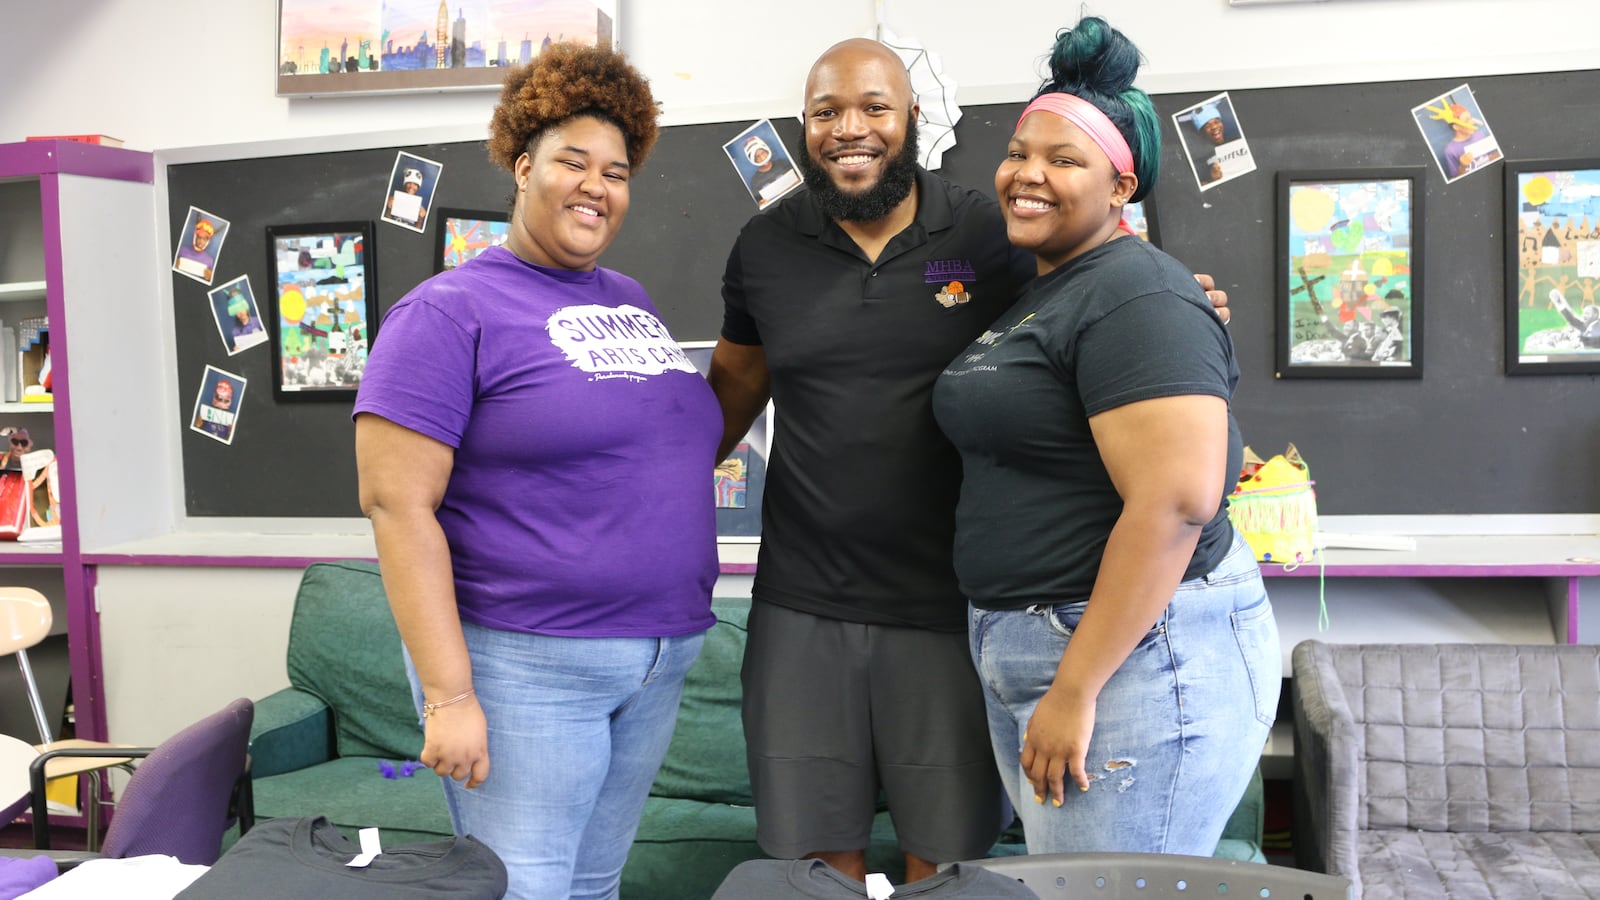 The Mott Hall Bridges Academy guidance counselor, Wesley McLeod, center, with two former students, whom he helped counsel after the deaths of their parents. The Brownsville middle school has been praised for its "grief-sensitive" approach to education.